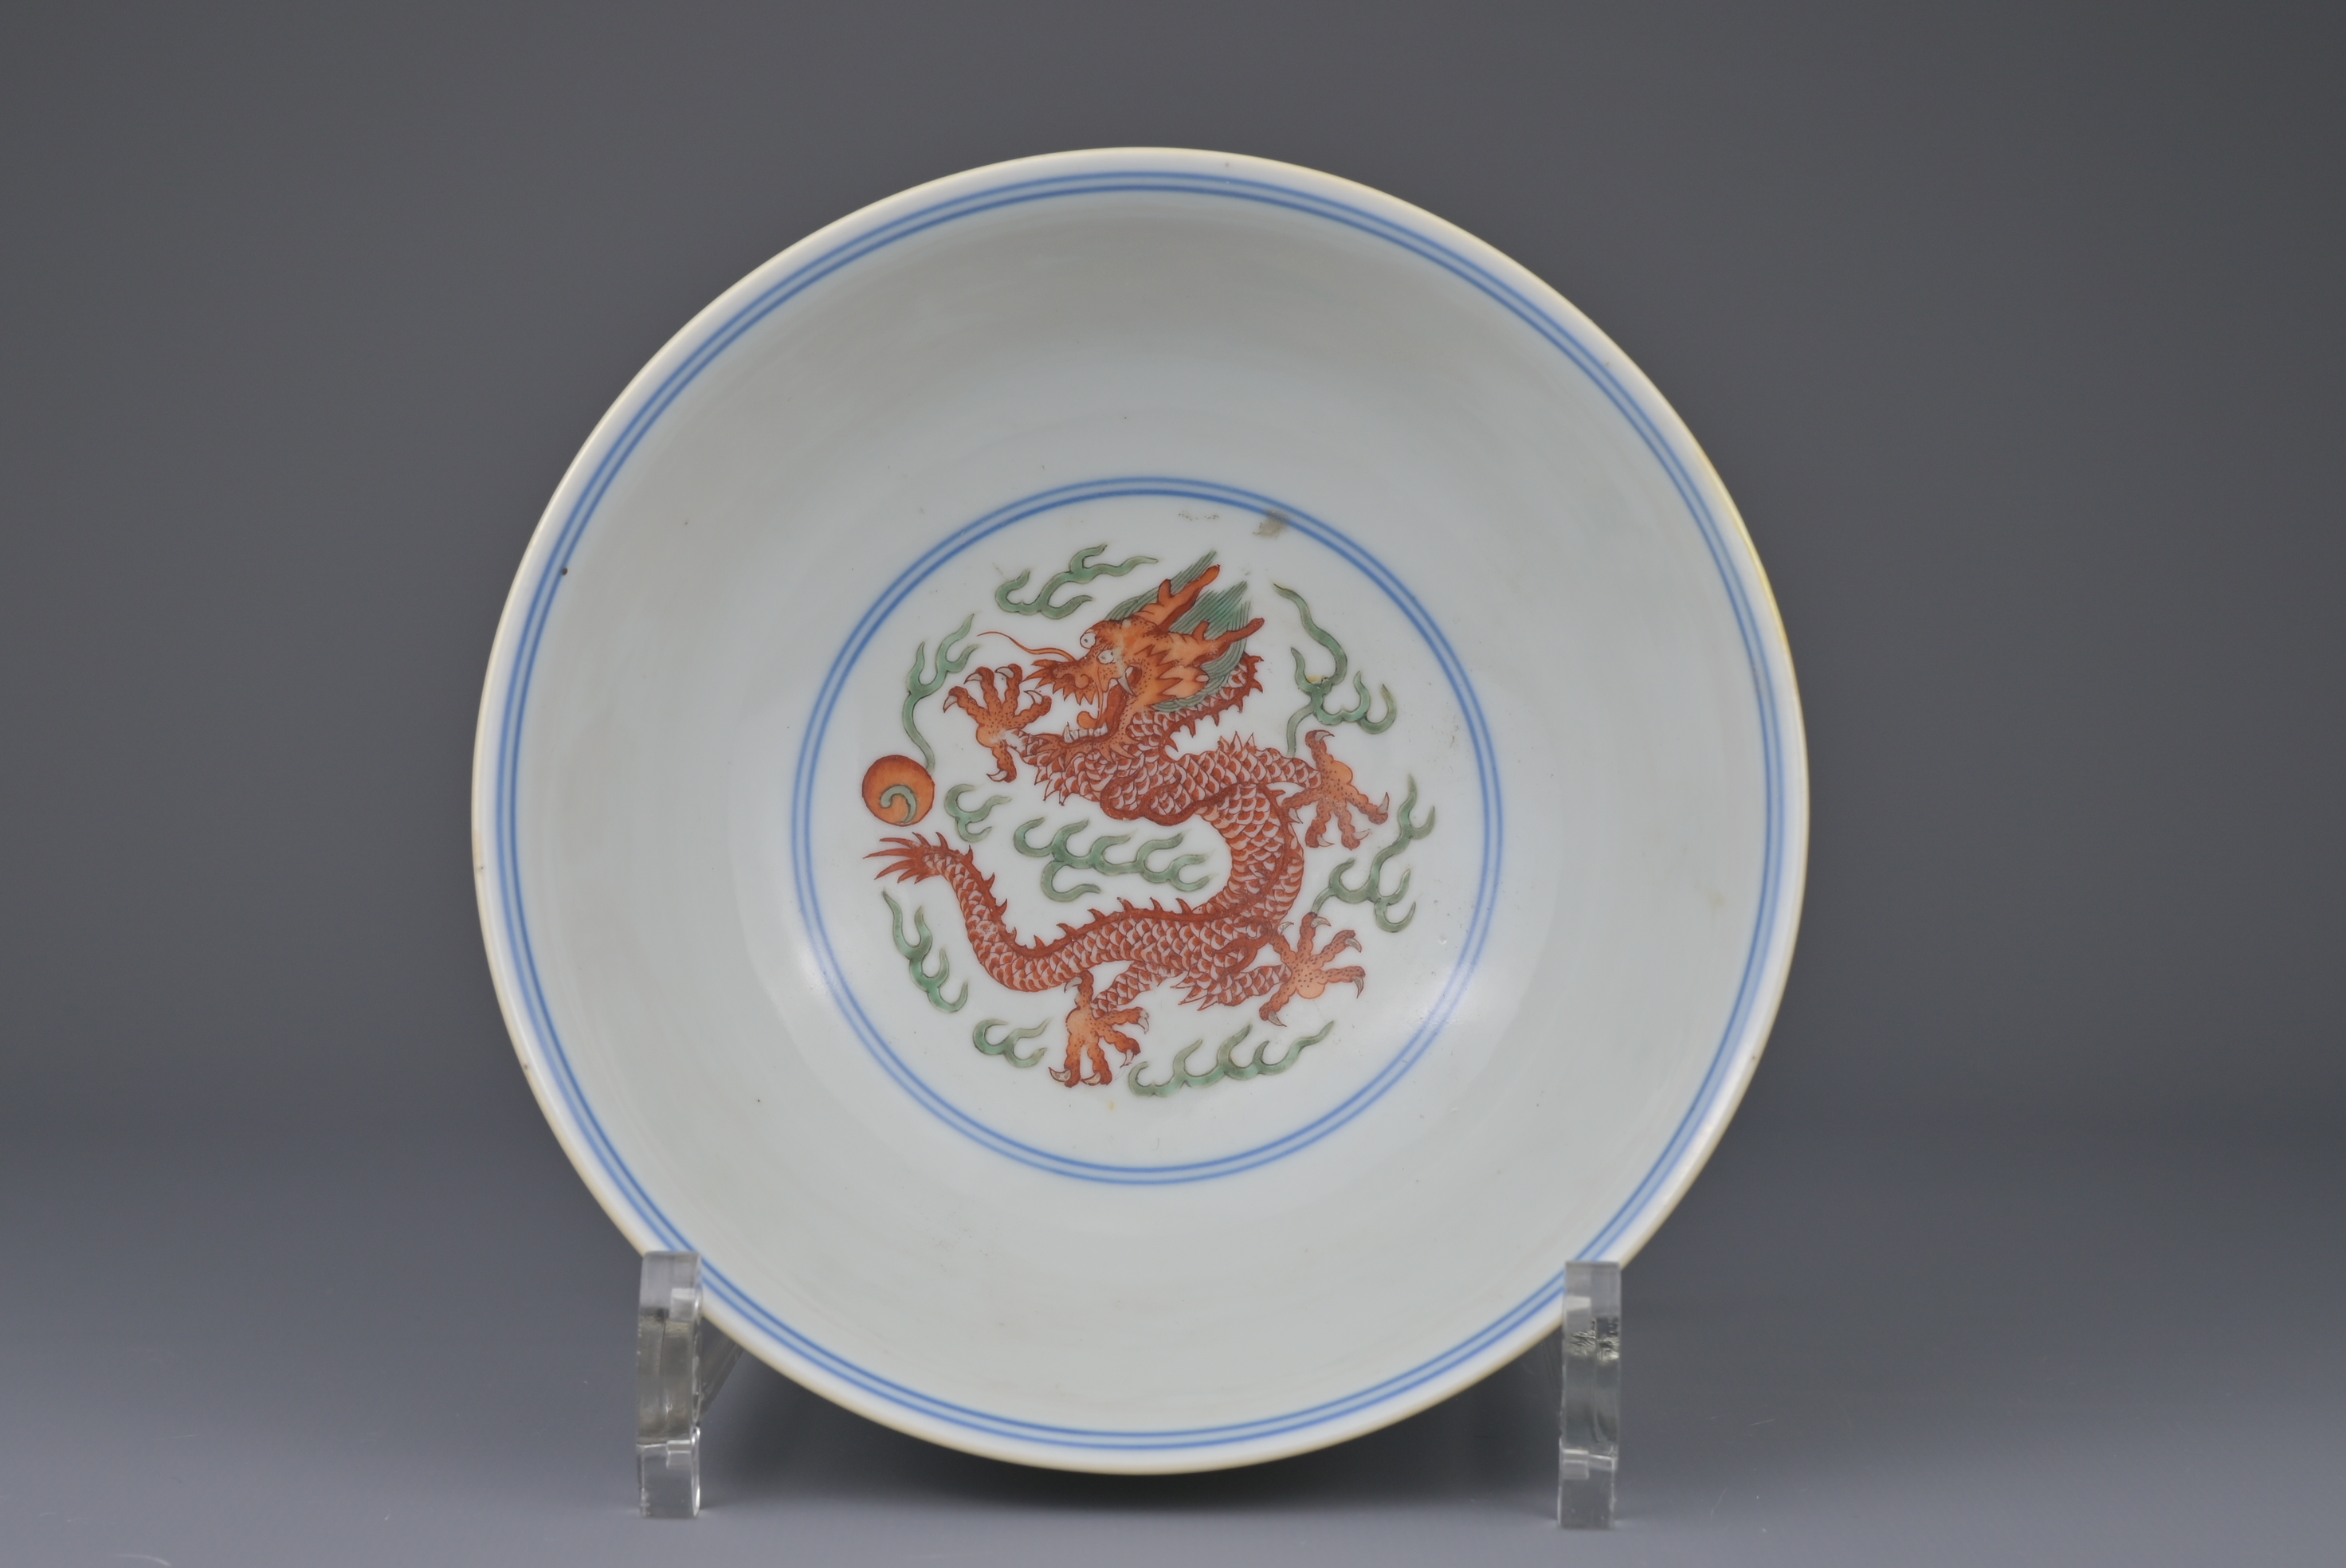 FINE CHINESE WUCAI ‘DRAGON & PHOENIX’ PORCELAIN BOWL, JIAQING MARK AND PERIOD, EARLY 19th CENTURY - Image 7 of 14